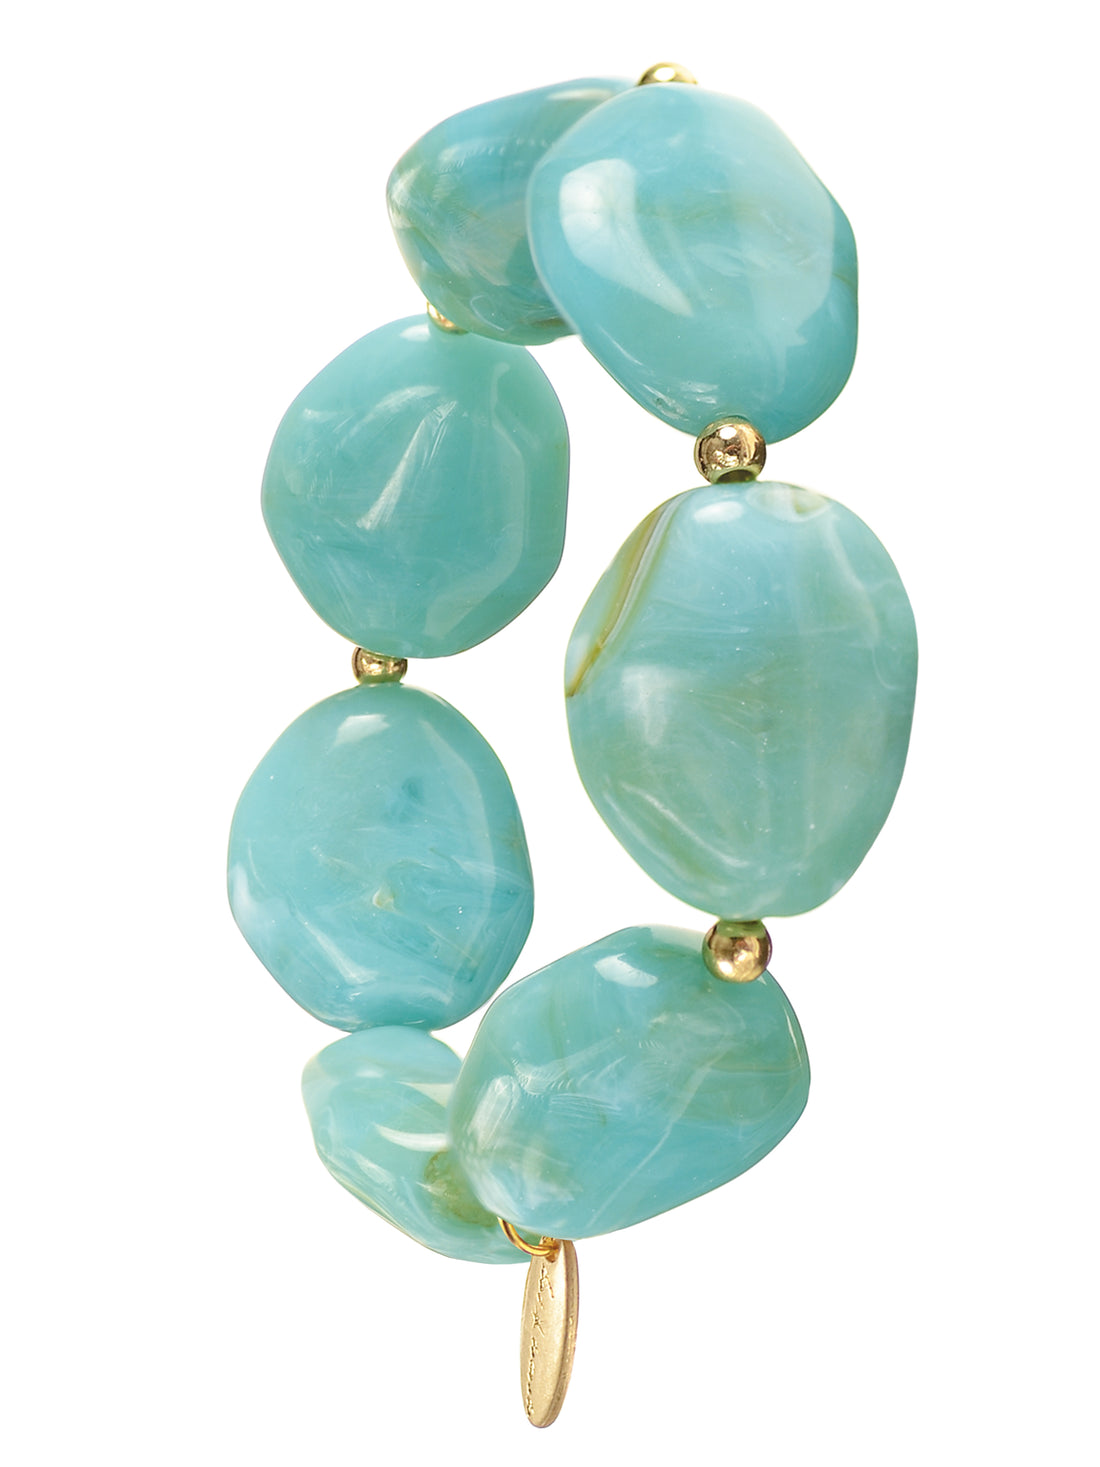 Cloudy Day Chunky Acrylic 'Stone' Bead Bracelet in Azure and Gold - PA459